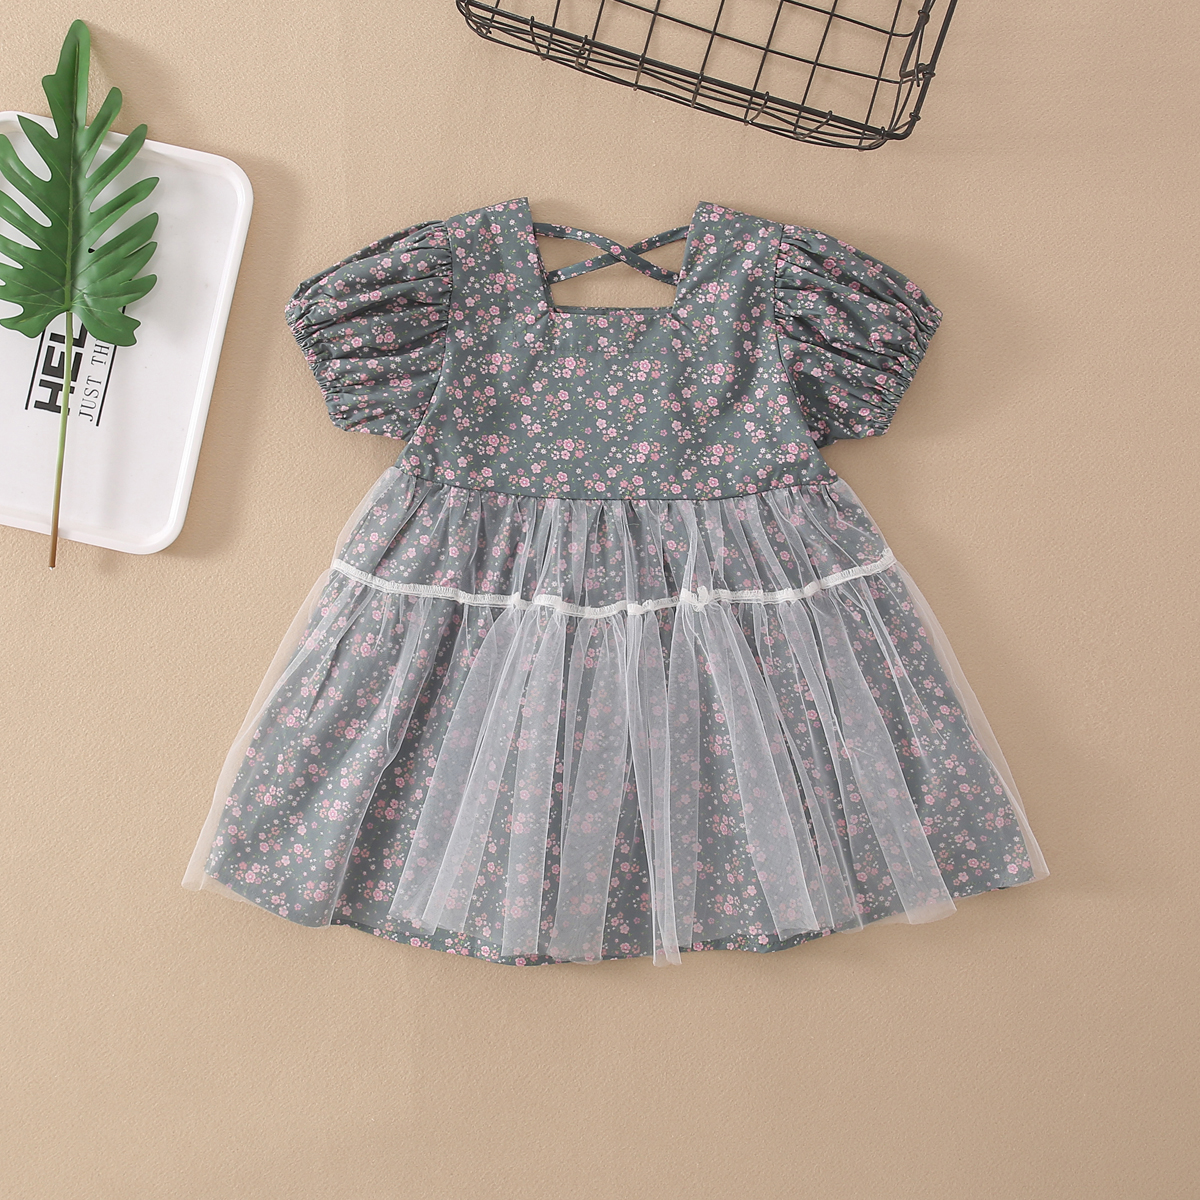 comfortable little girls dresses best place to buy kids cloths cheap free design service